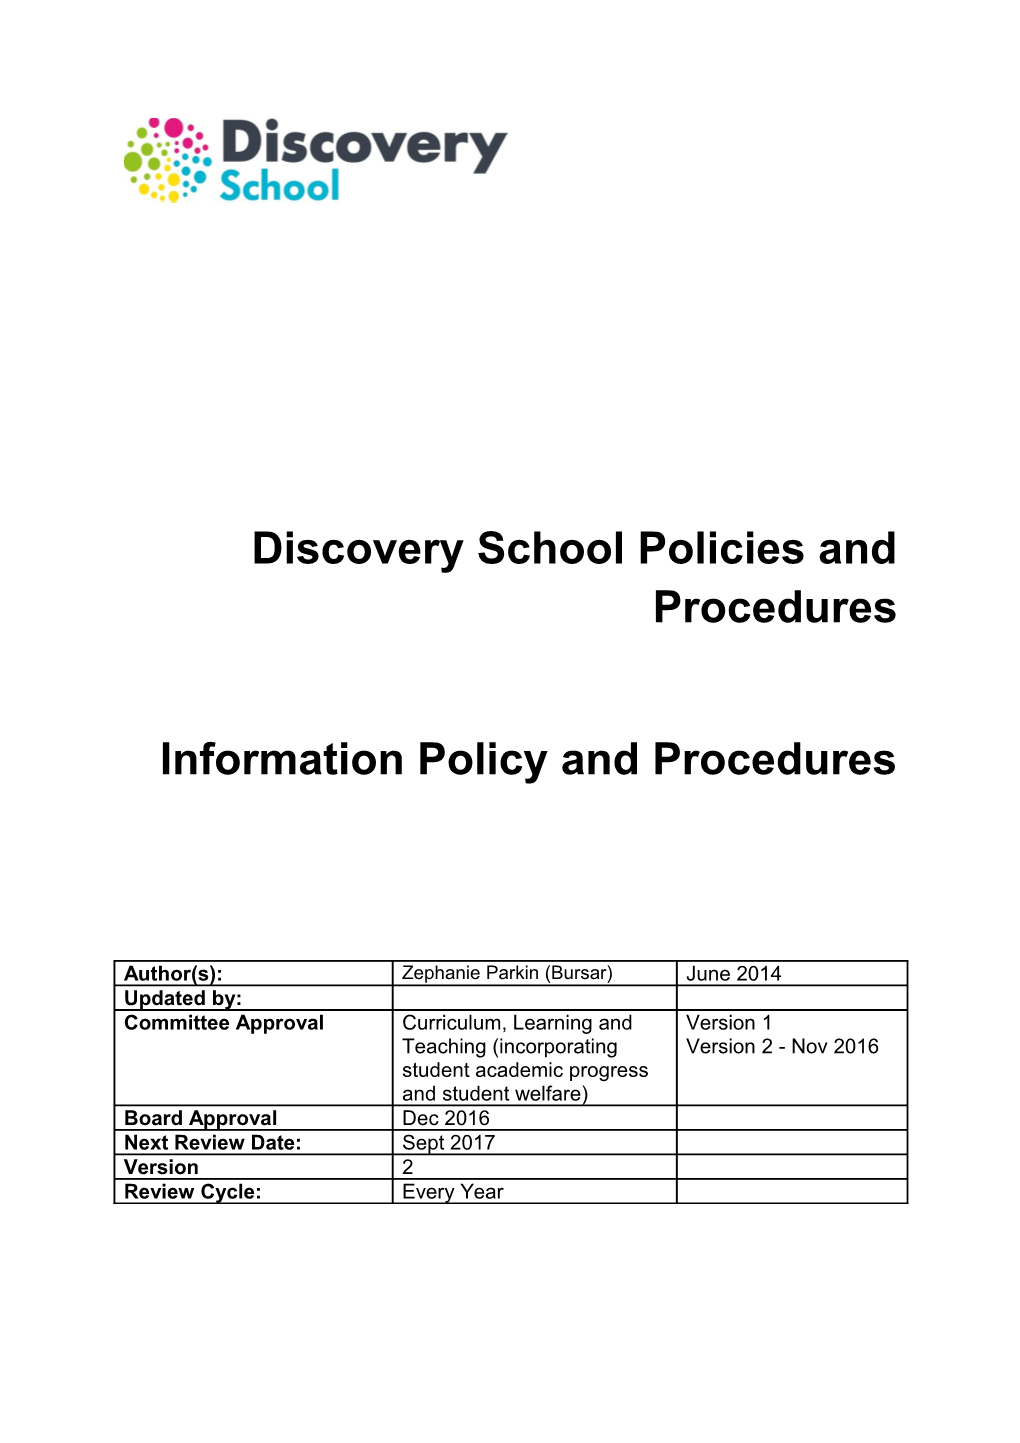 Discovery School Policies and Procedures